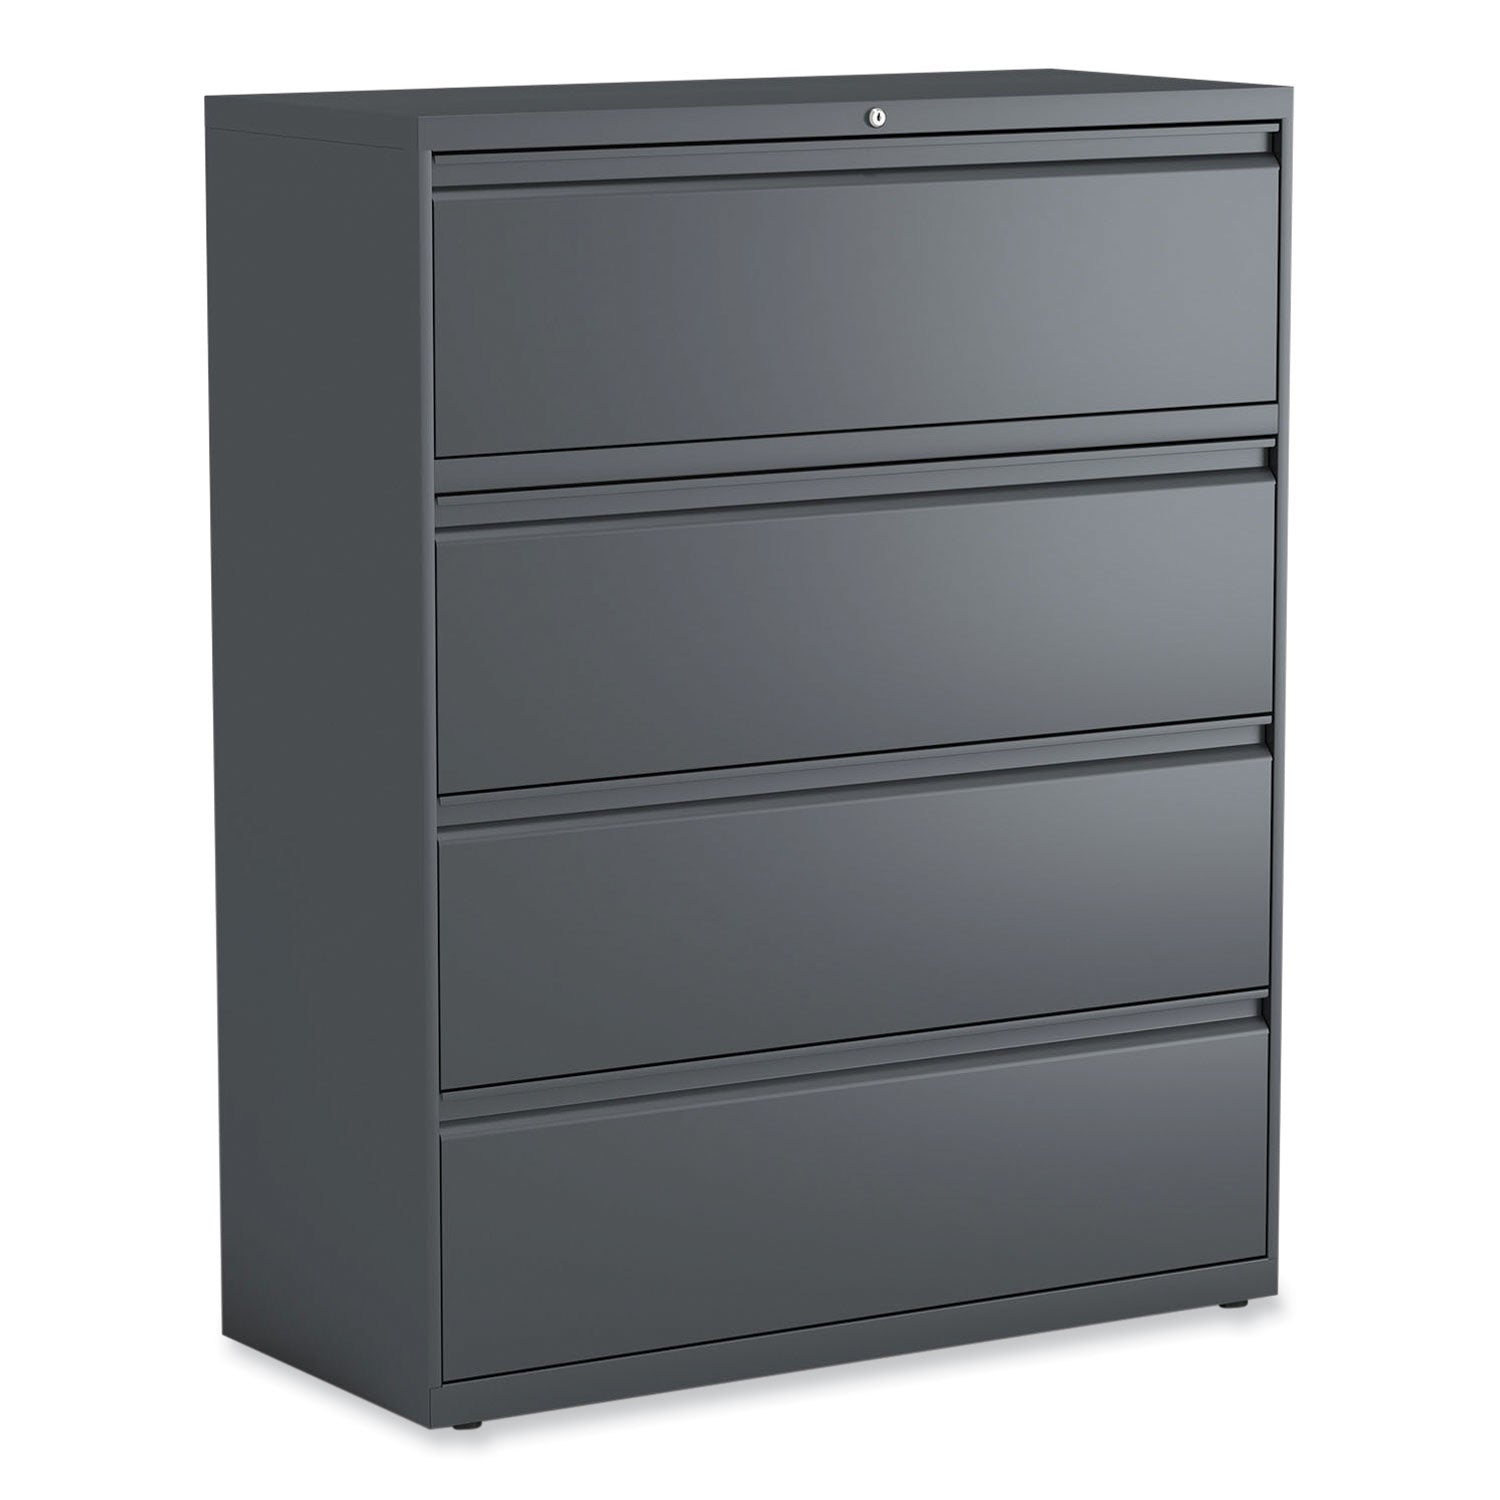 lateral-file-4-legal-letter-a4-a5-size-file-drawers-charcoal-42-x-1863-x-525_alehlf4254cc - 1